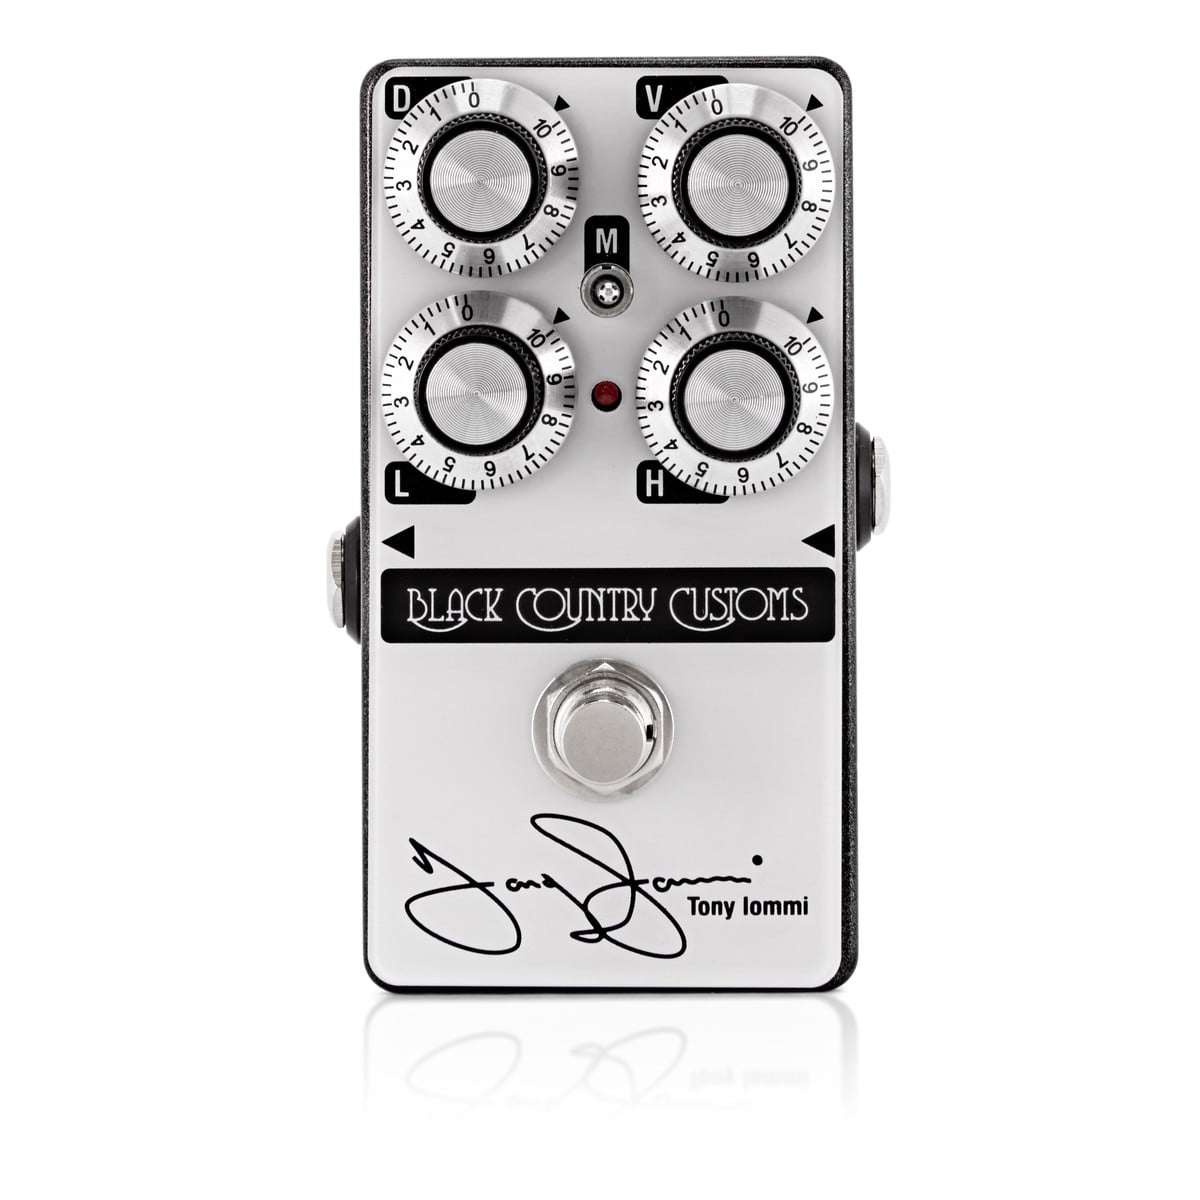 Laney Black Country Customs Tony Iommi Signature Boost - New Laney              EQ Boost    Guitar Effect Pedal